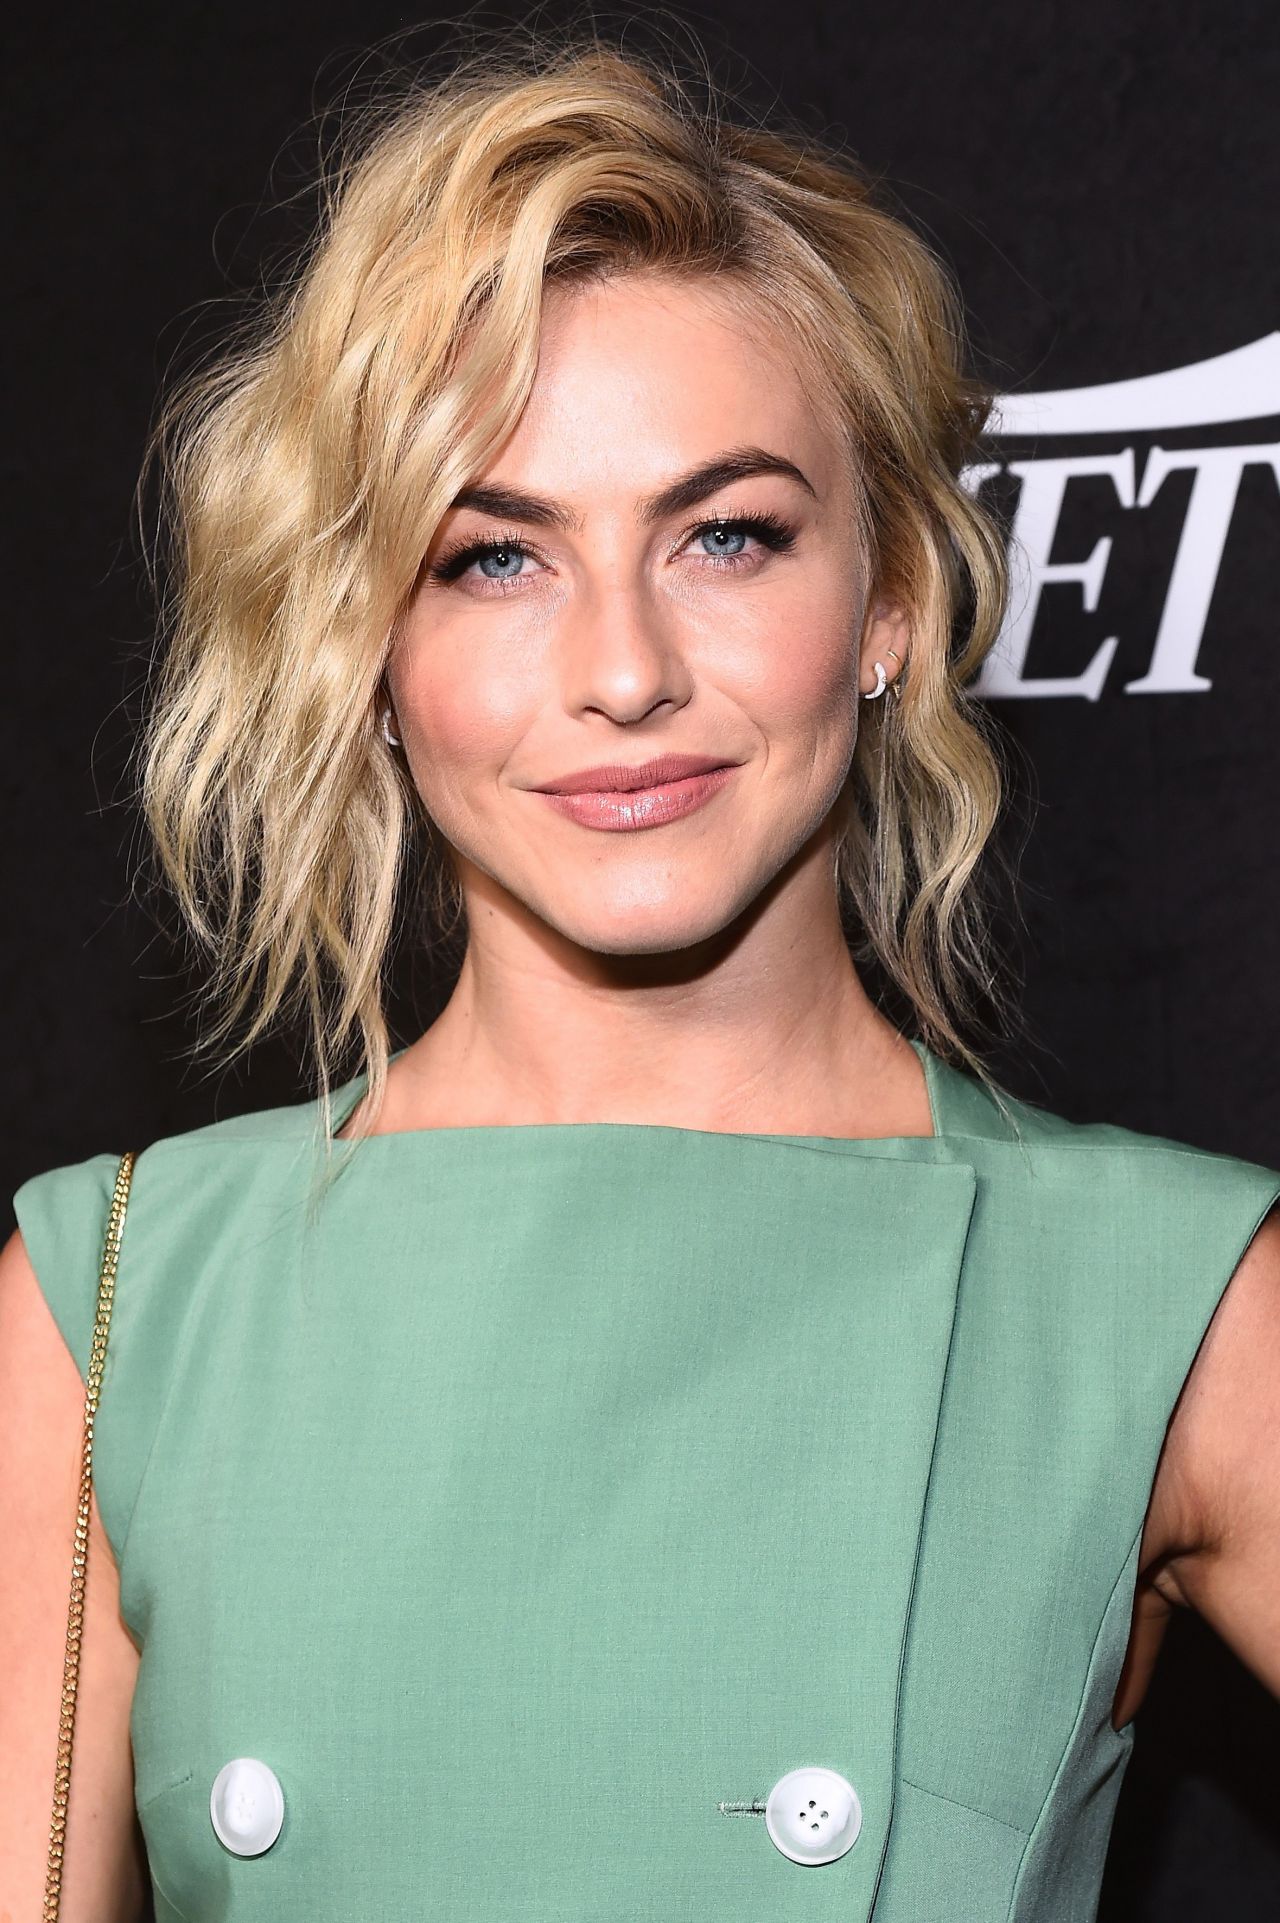 Happy 33rd Birthday Shout Out to the lovely Julianne Hough. 